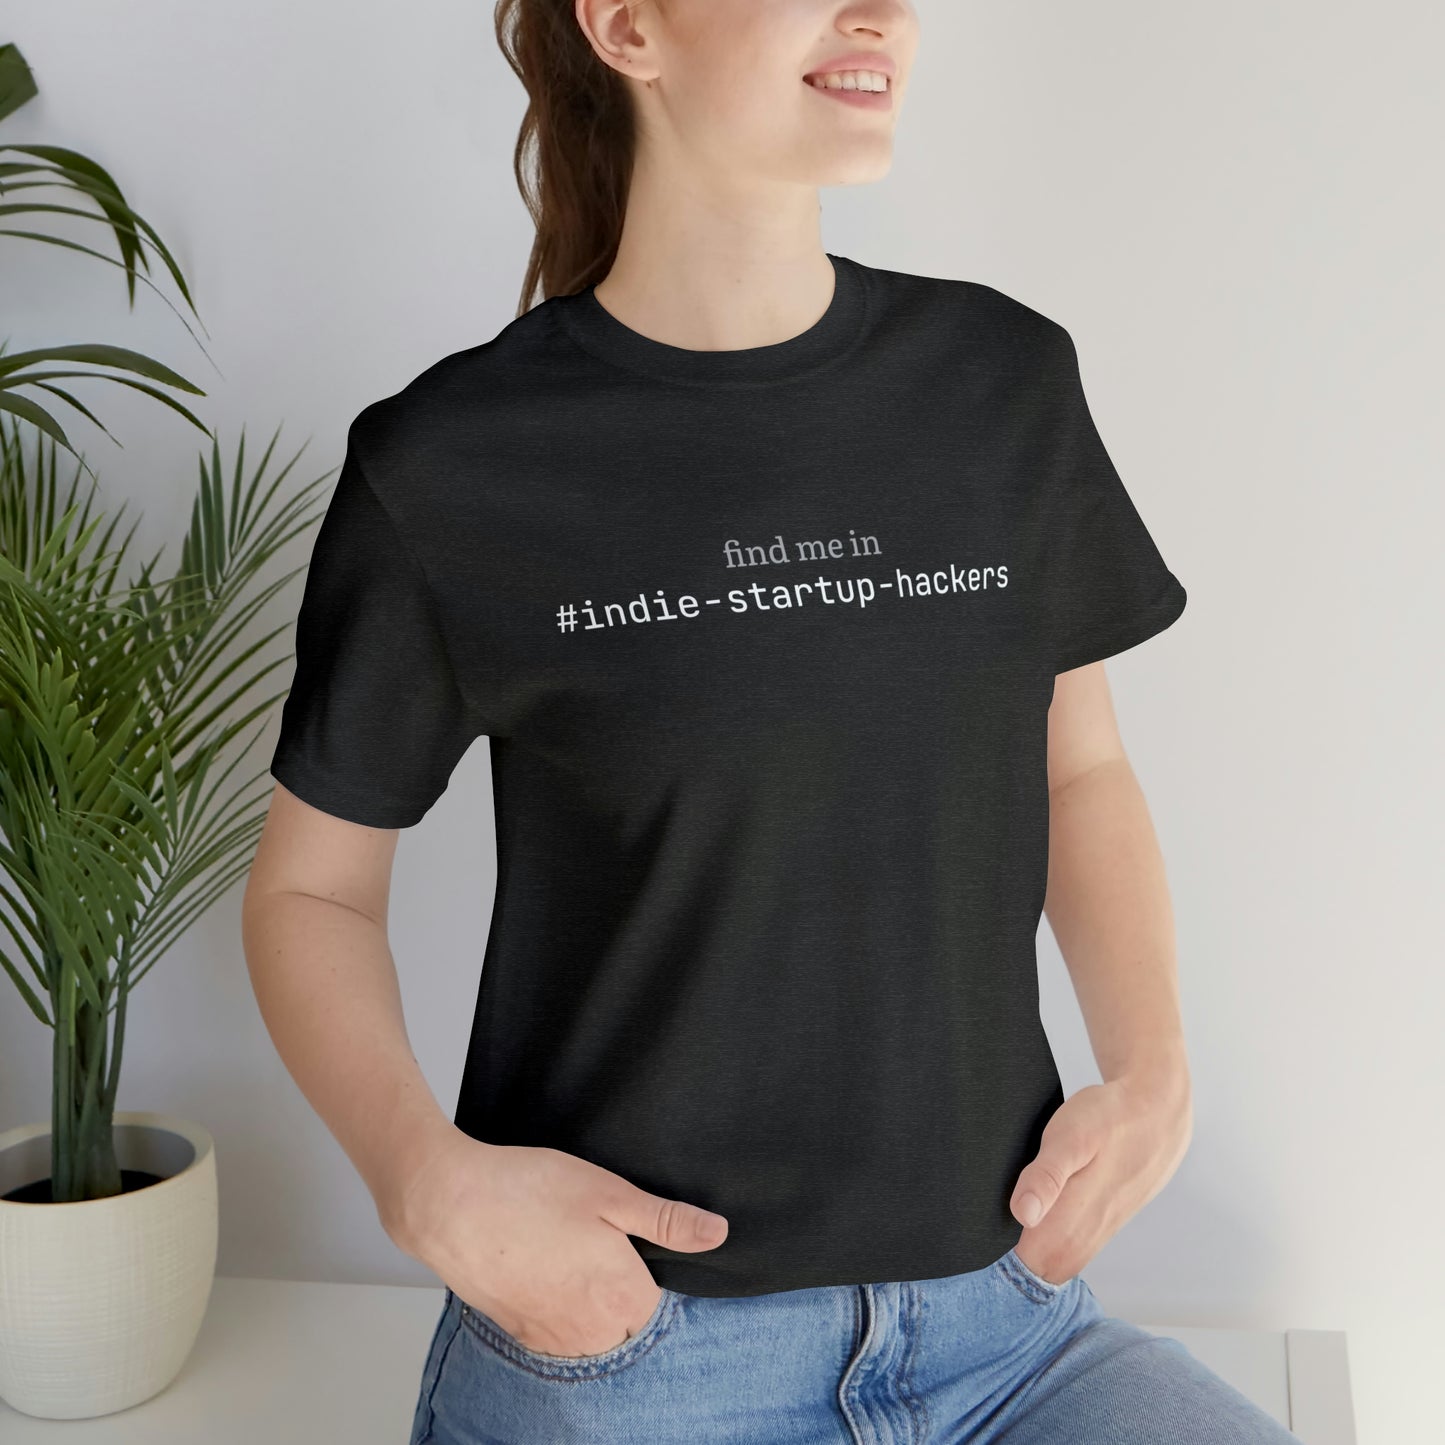 Find me in #indie-startup-hackers T-Shirt